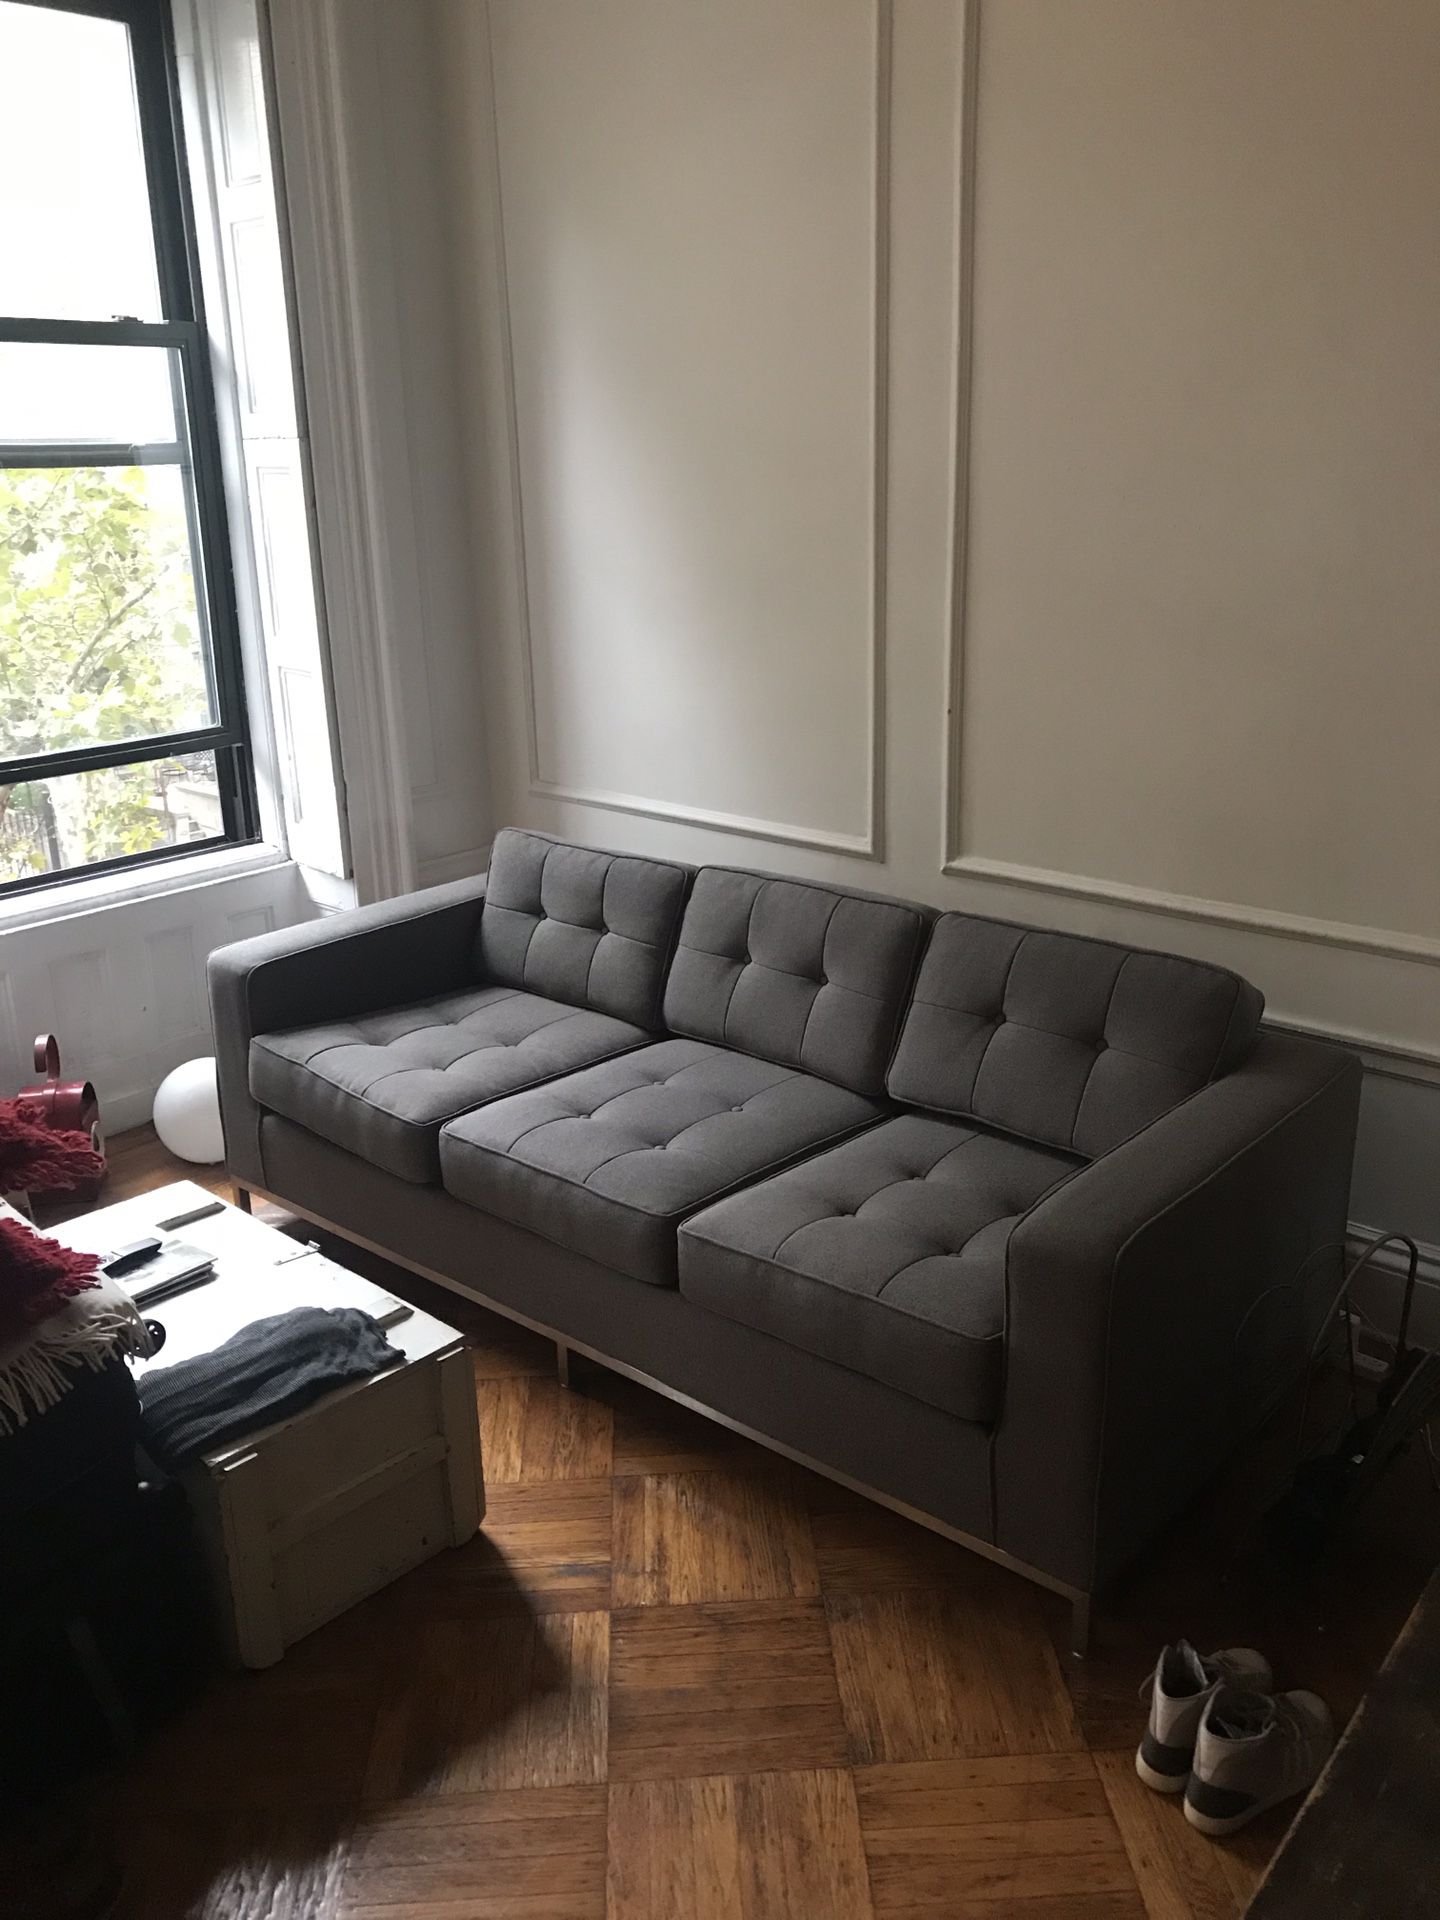 Gray “GUS*” couch Modern chic